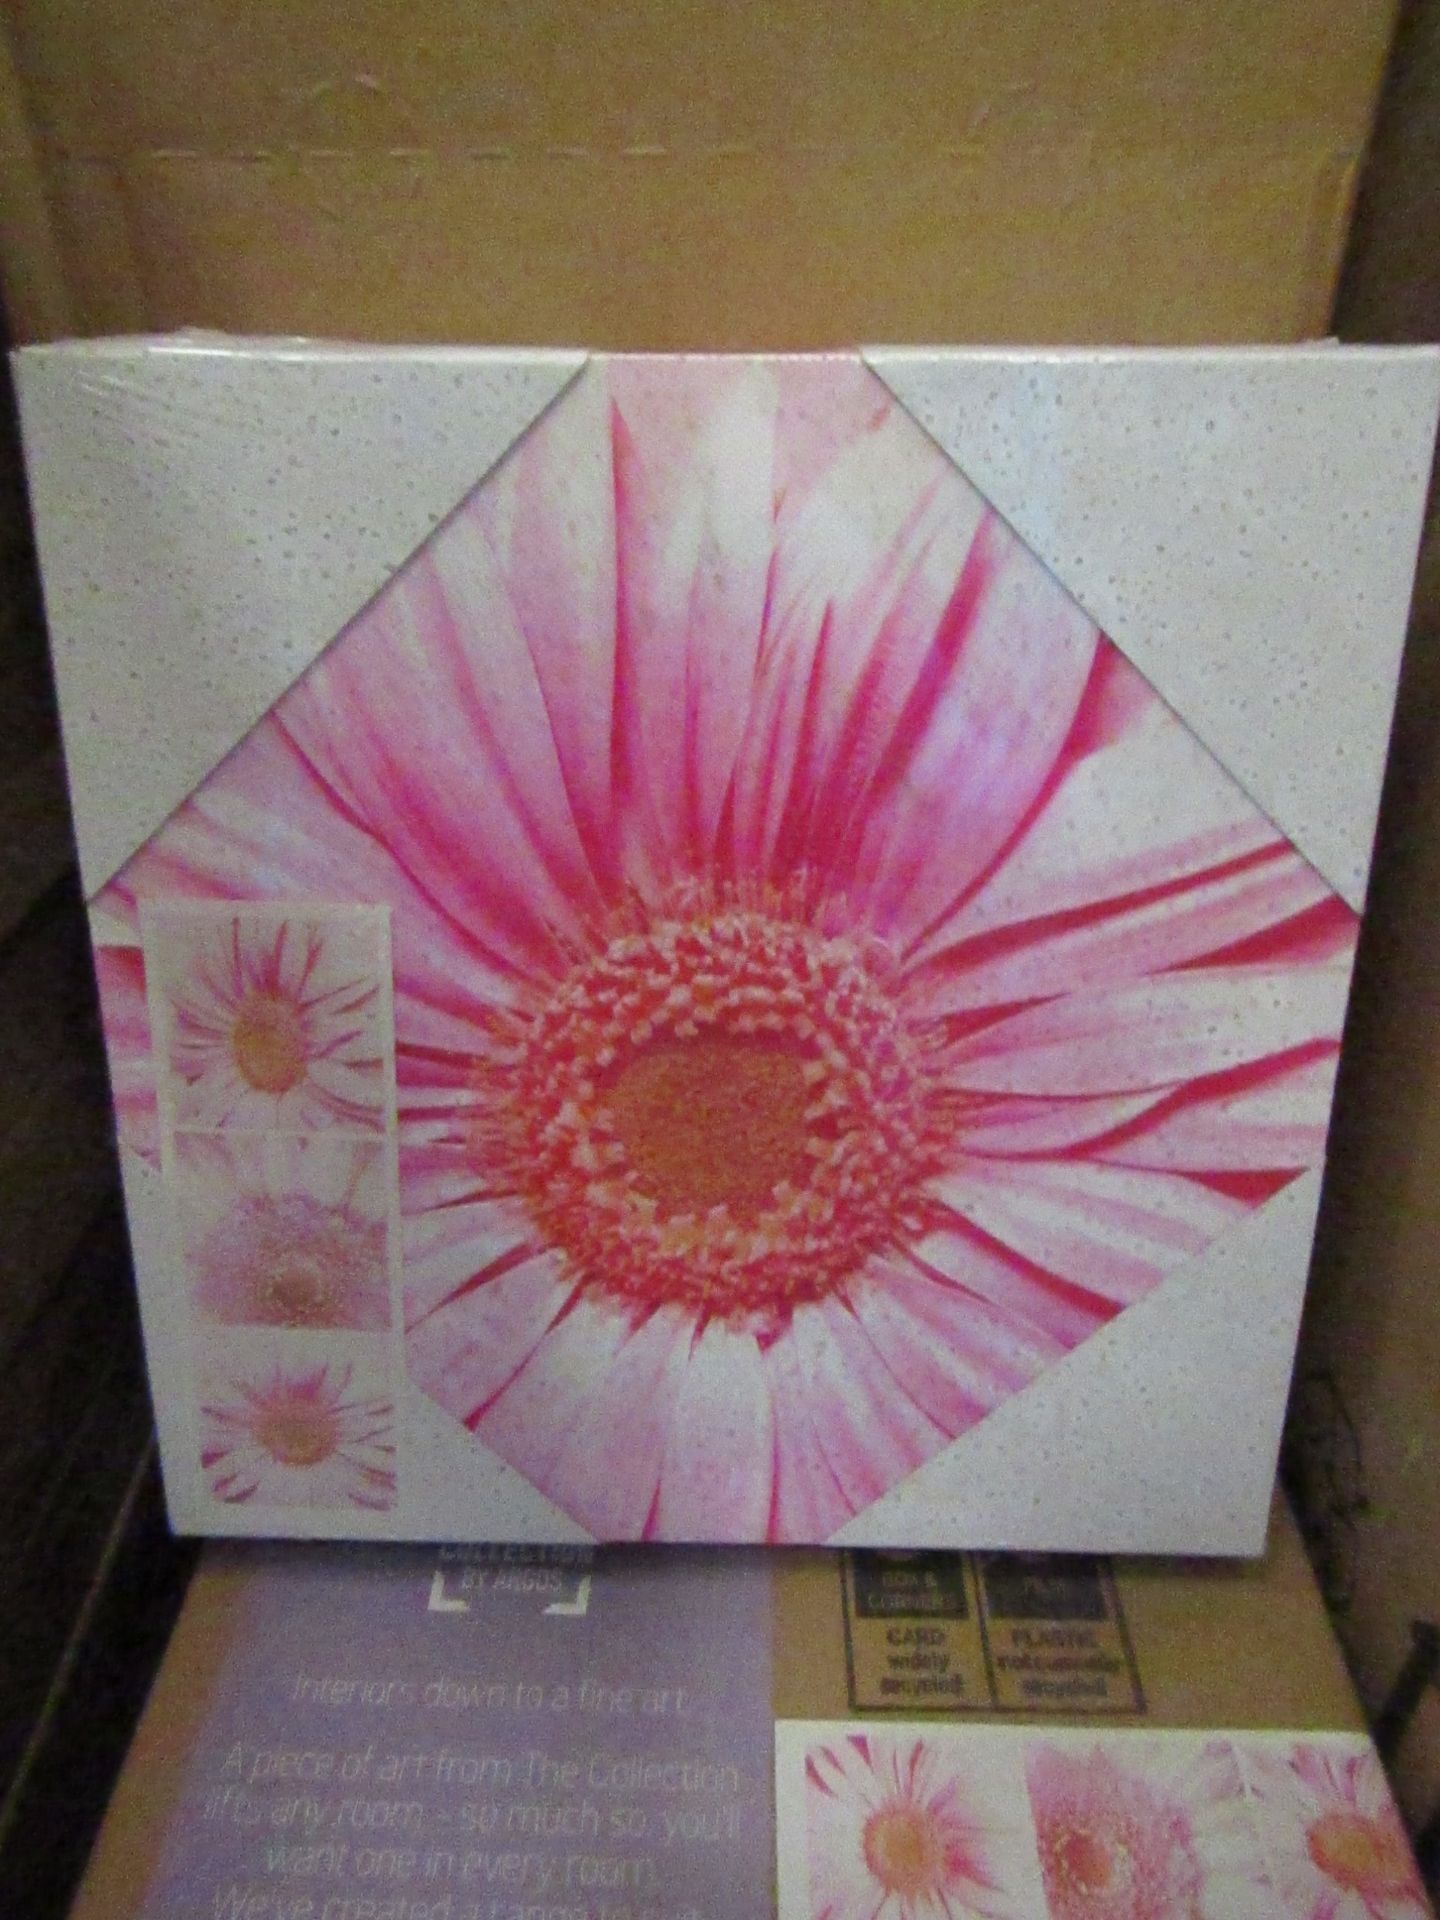 1 x box of 10 sets of 3 "Pink Daisies" Canvases By Arthouse Wall Art size 20cm x 20cm new &